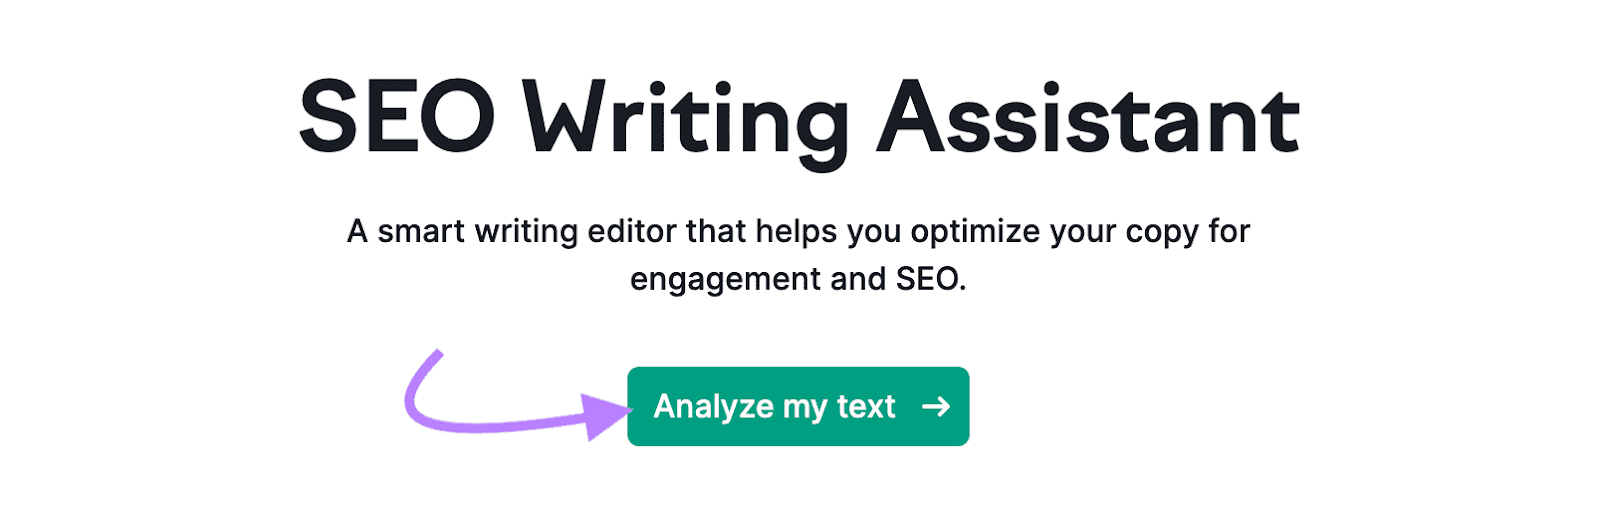 "Analyze my text" button highlighted under SEO Writing Assistant